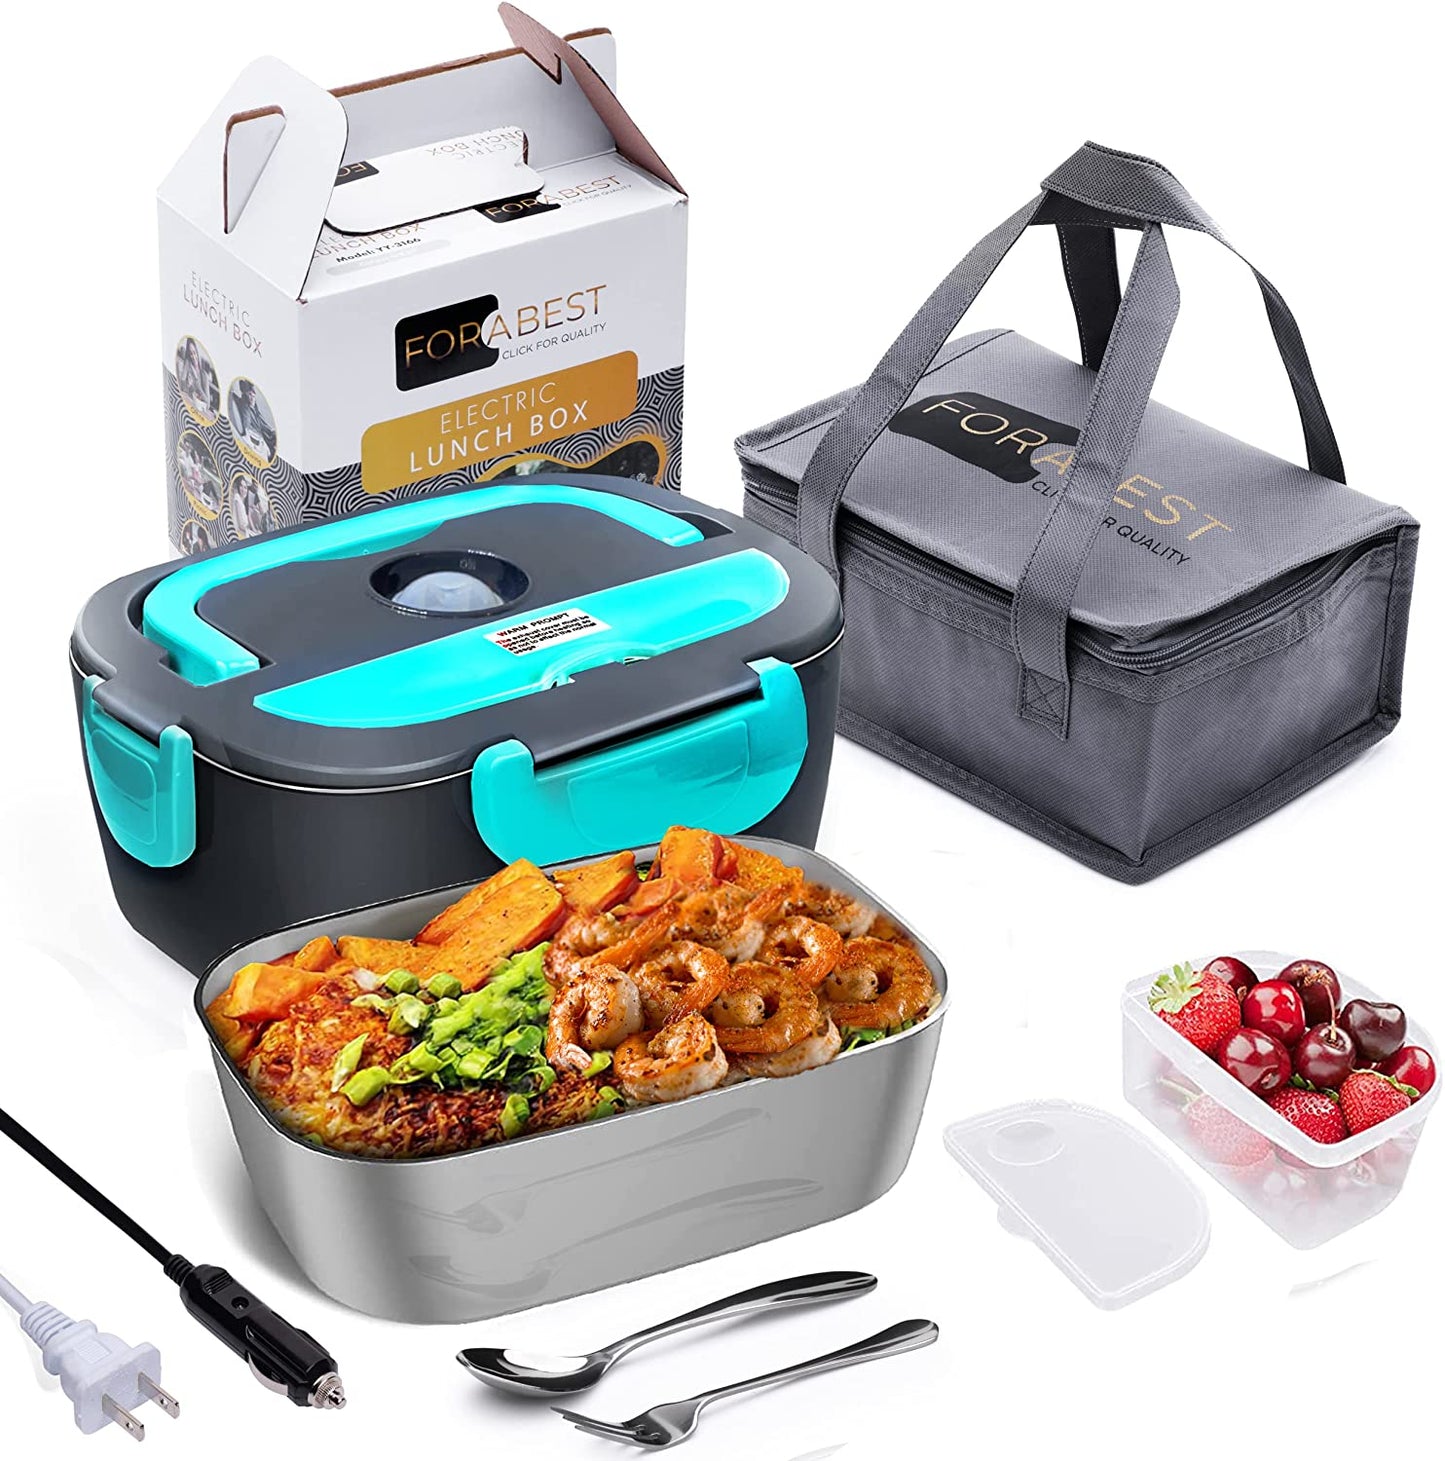 ELECTRIC HEATING THERMAL THERMOS COOKING LUNCH BOX